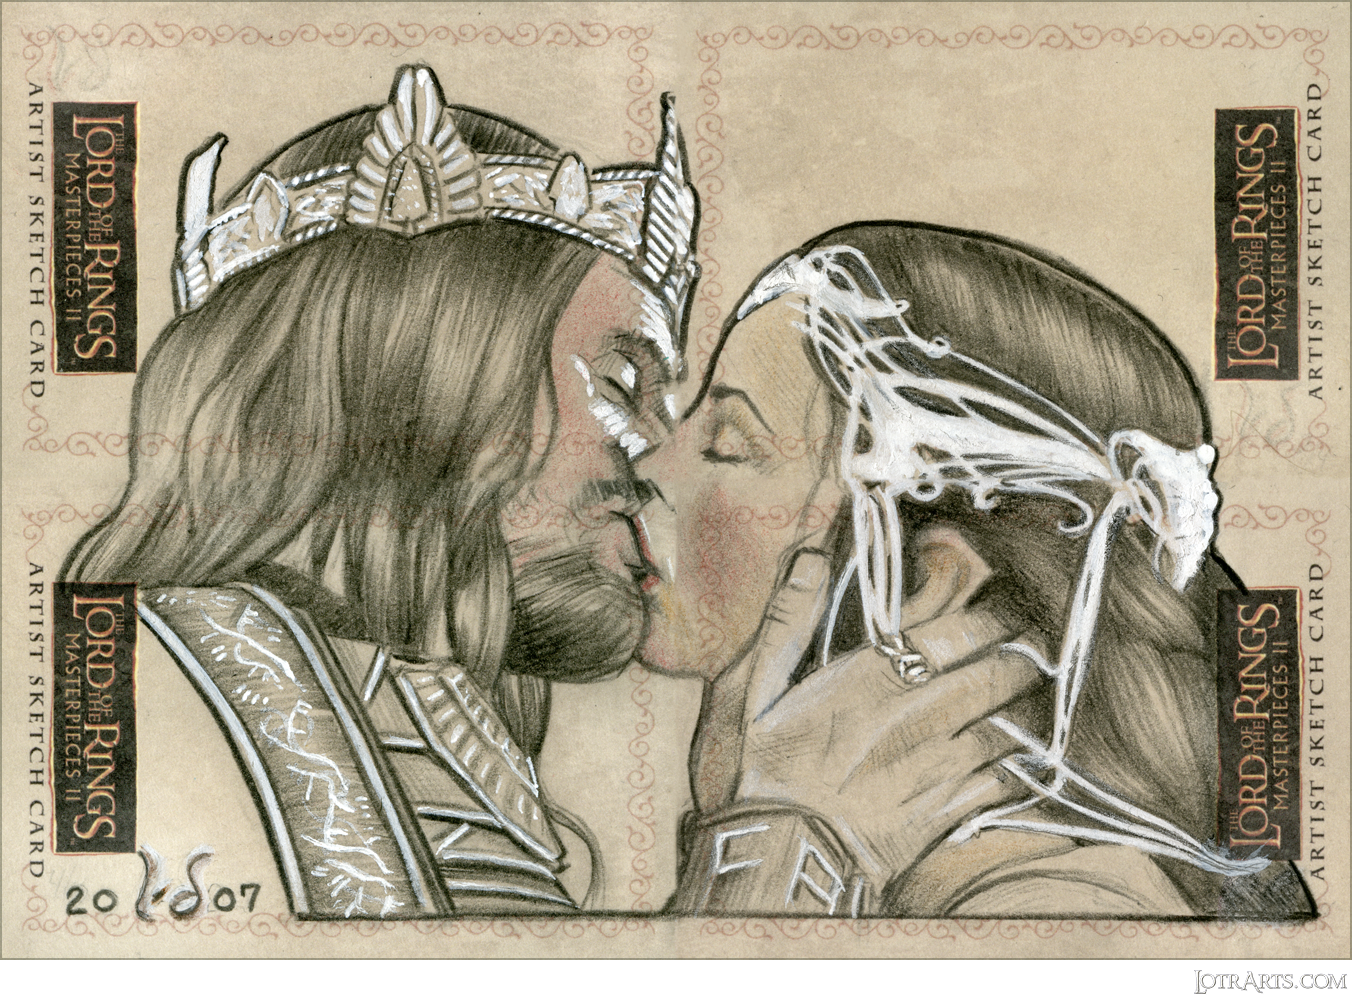 Aragorn and Arwen, four-card panel, by Doyle: artist return sketches<span class="ngViews">8 views</span>